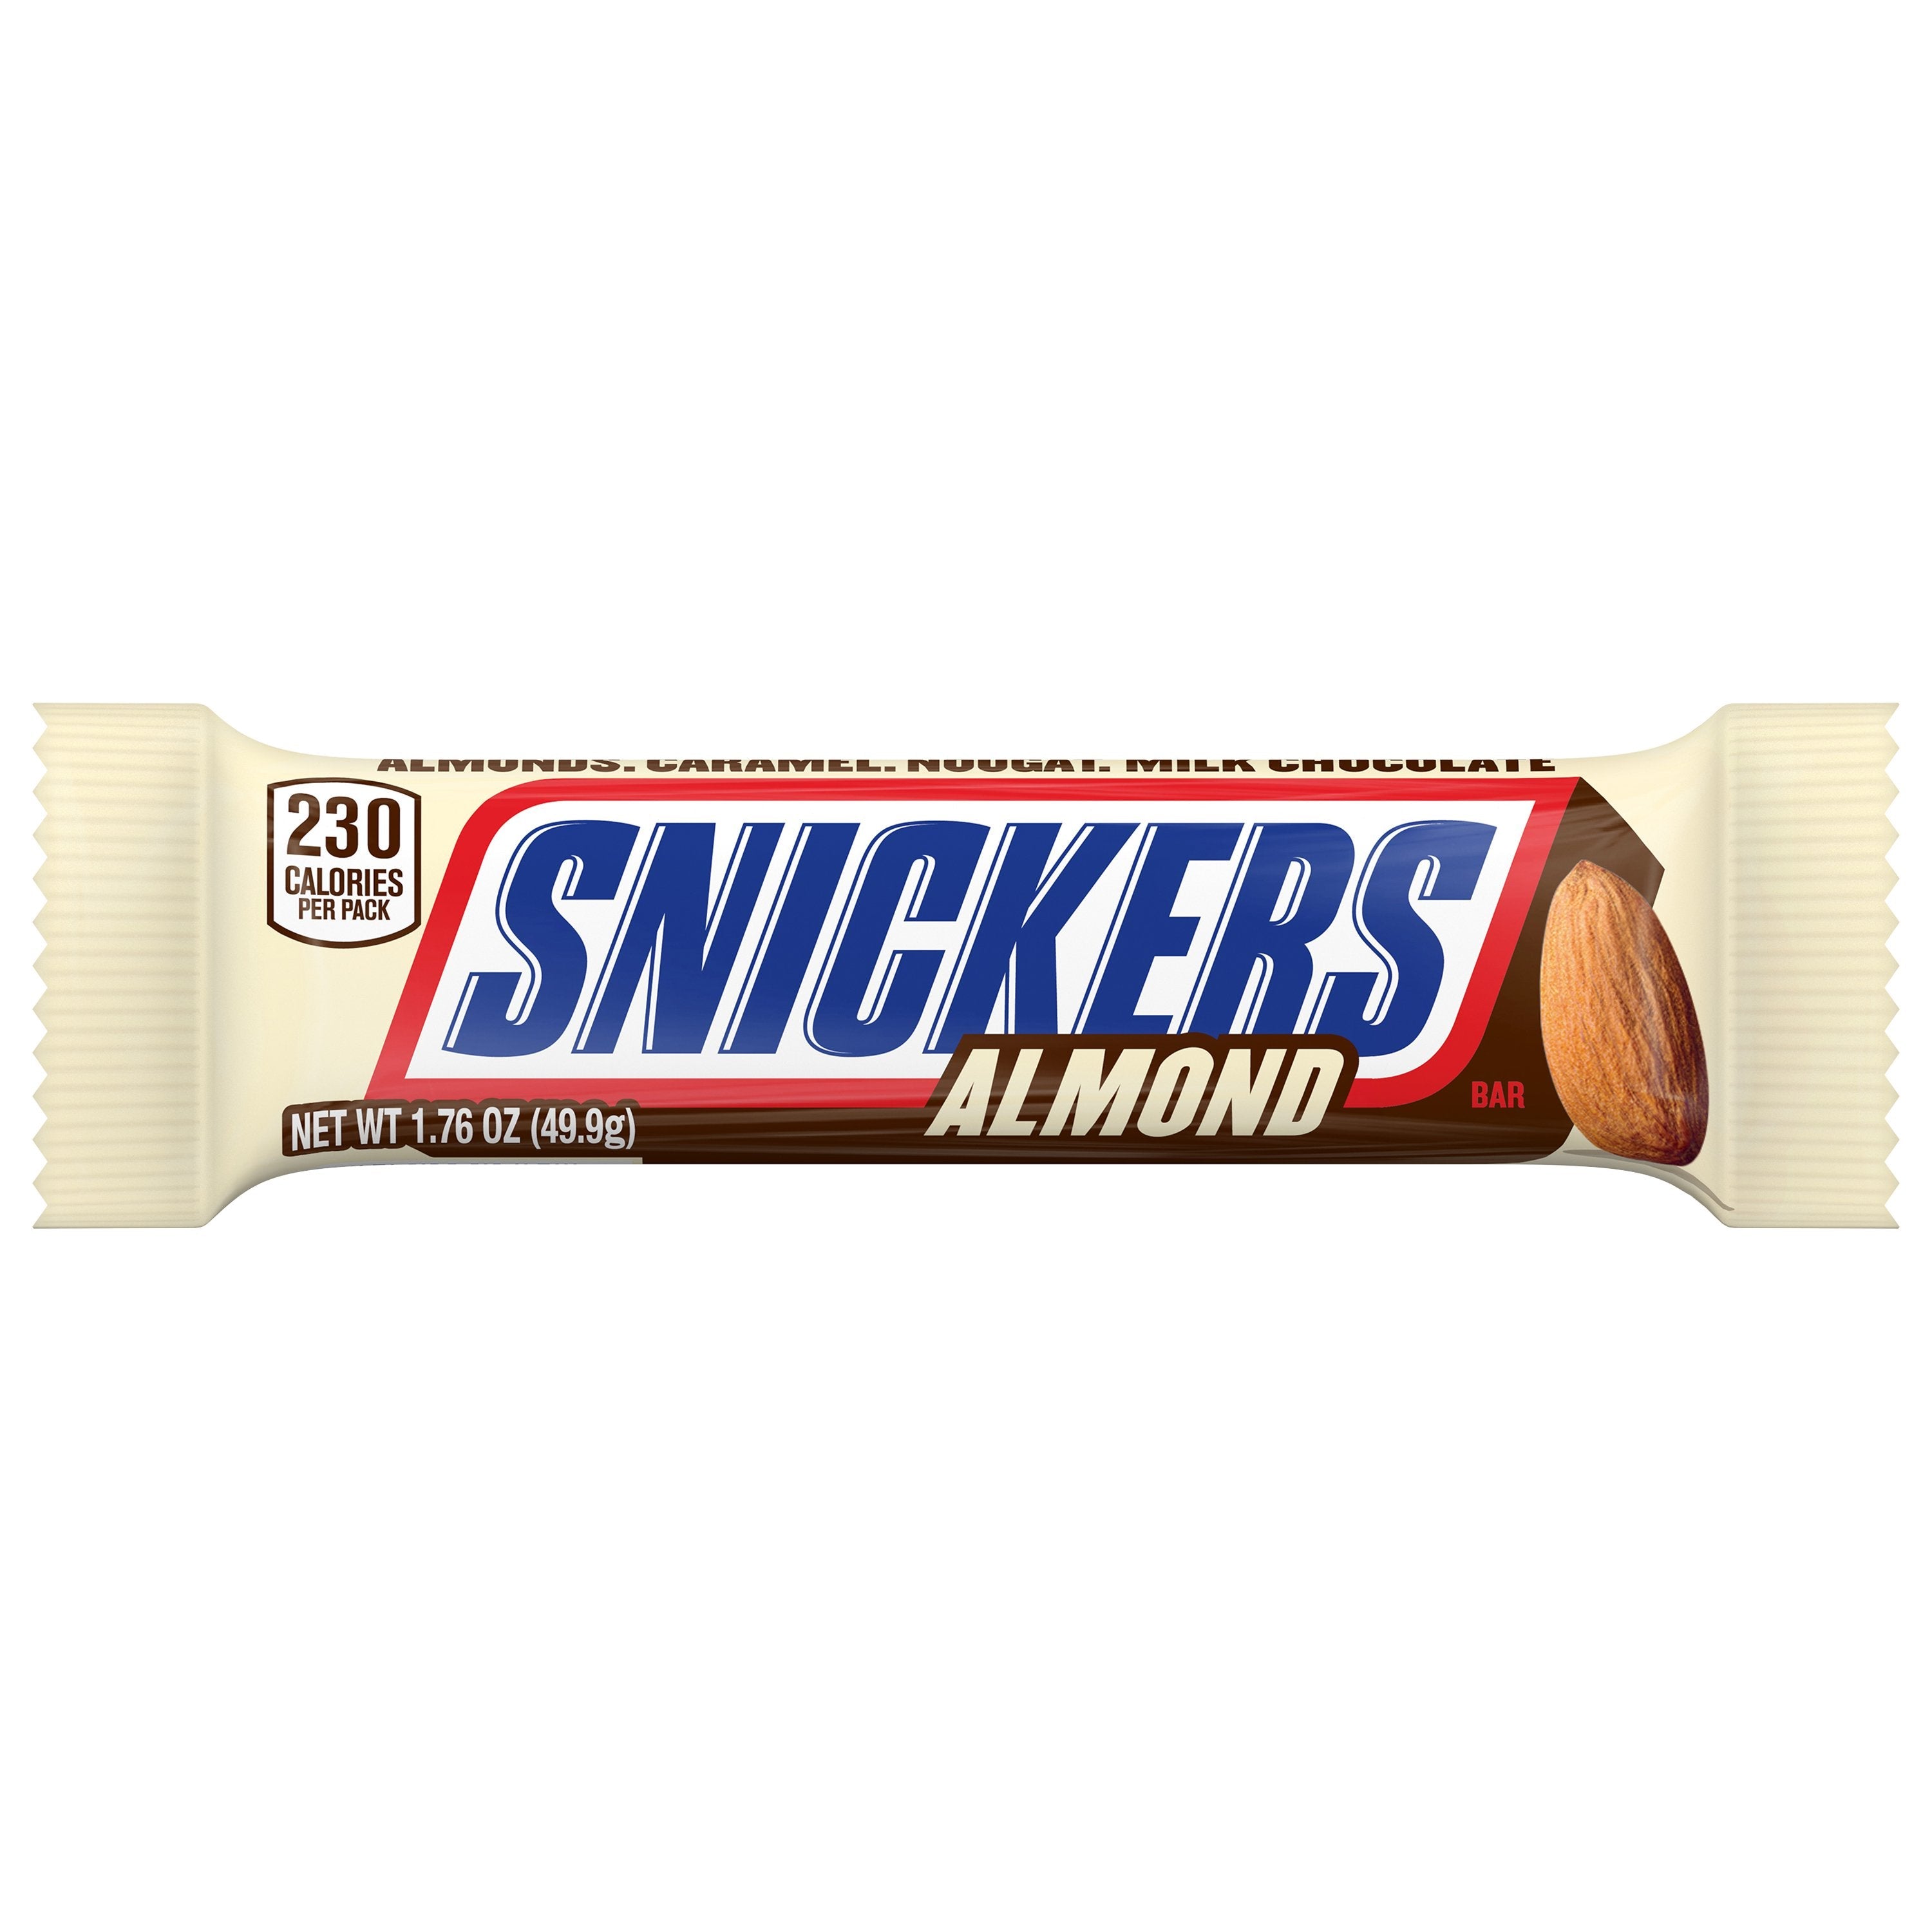 Snickers 5-Pack